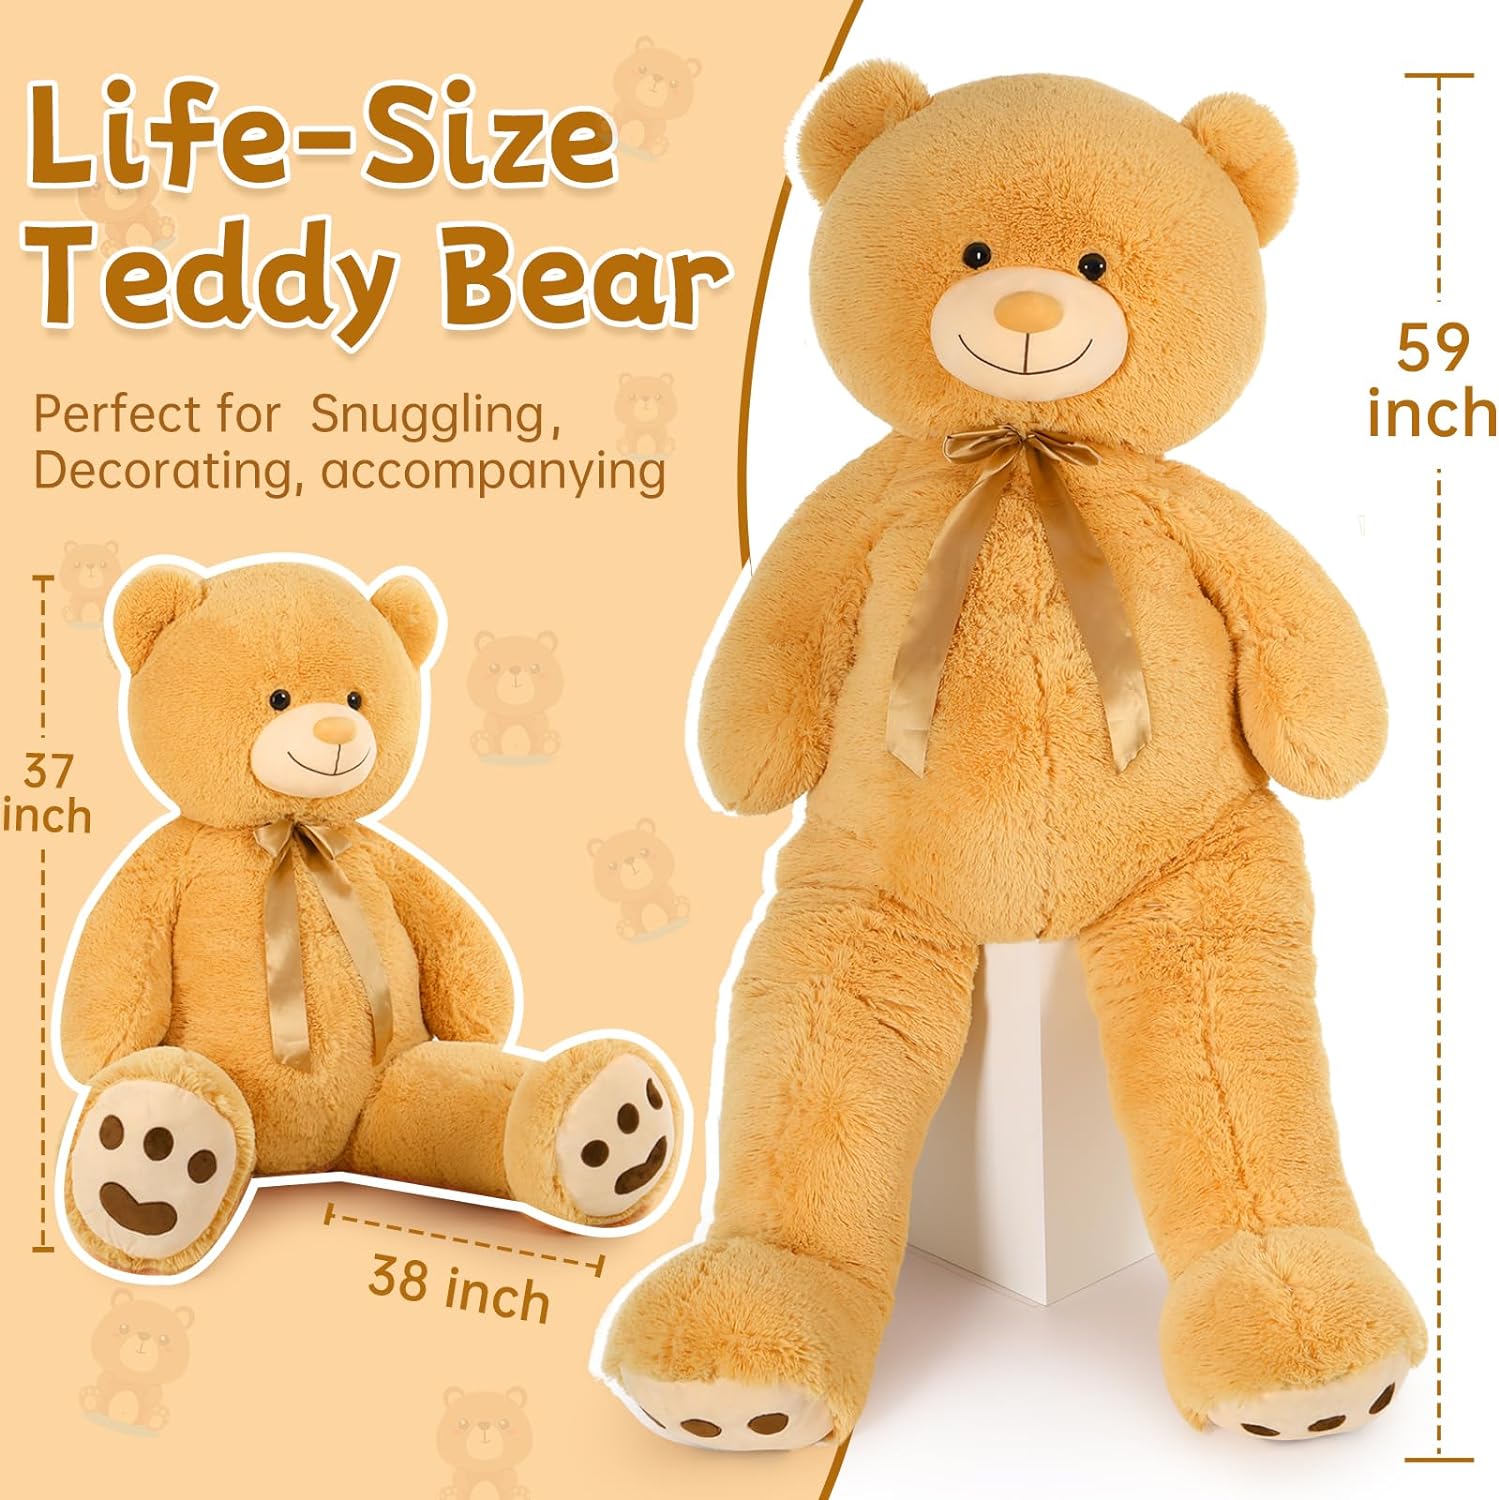 Large Teddy Bear Stuffed Toy, Light Brown/Pink, 5 FT